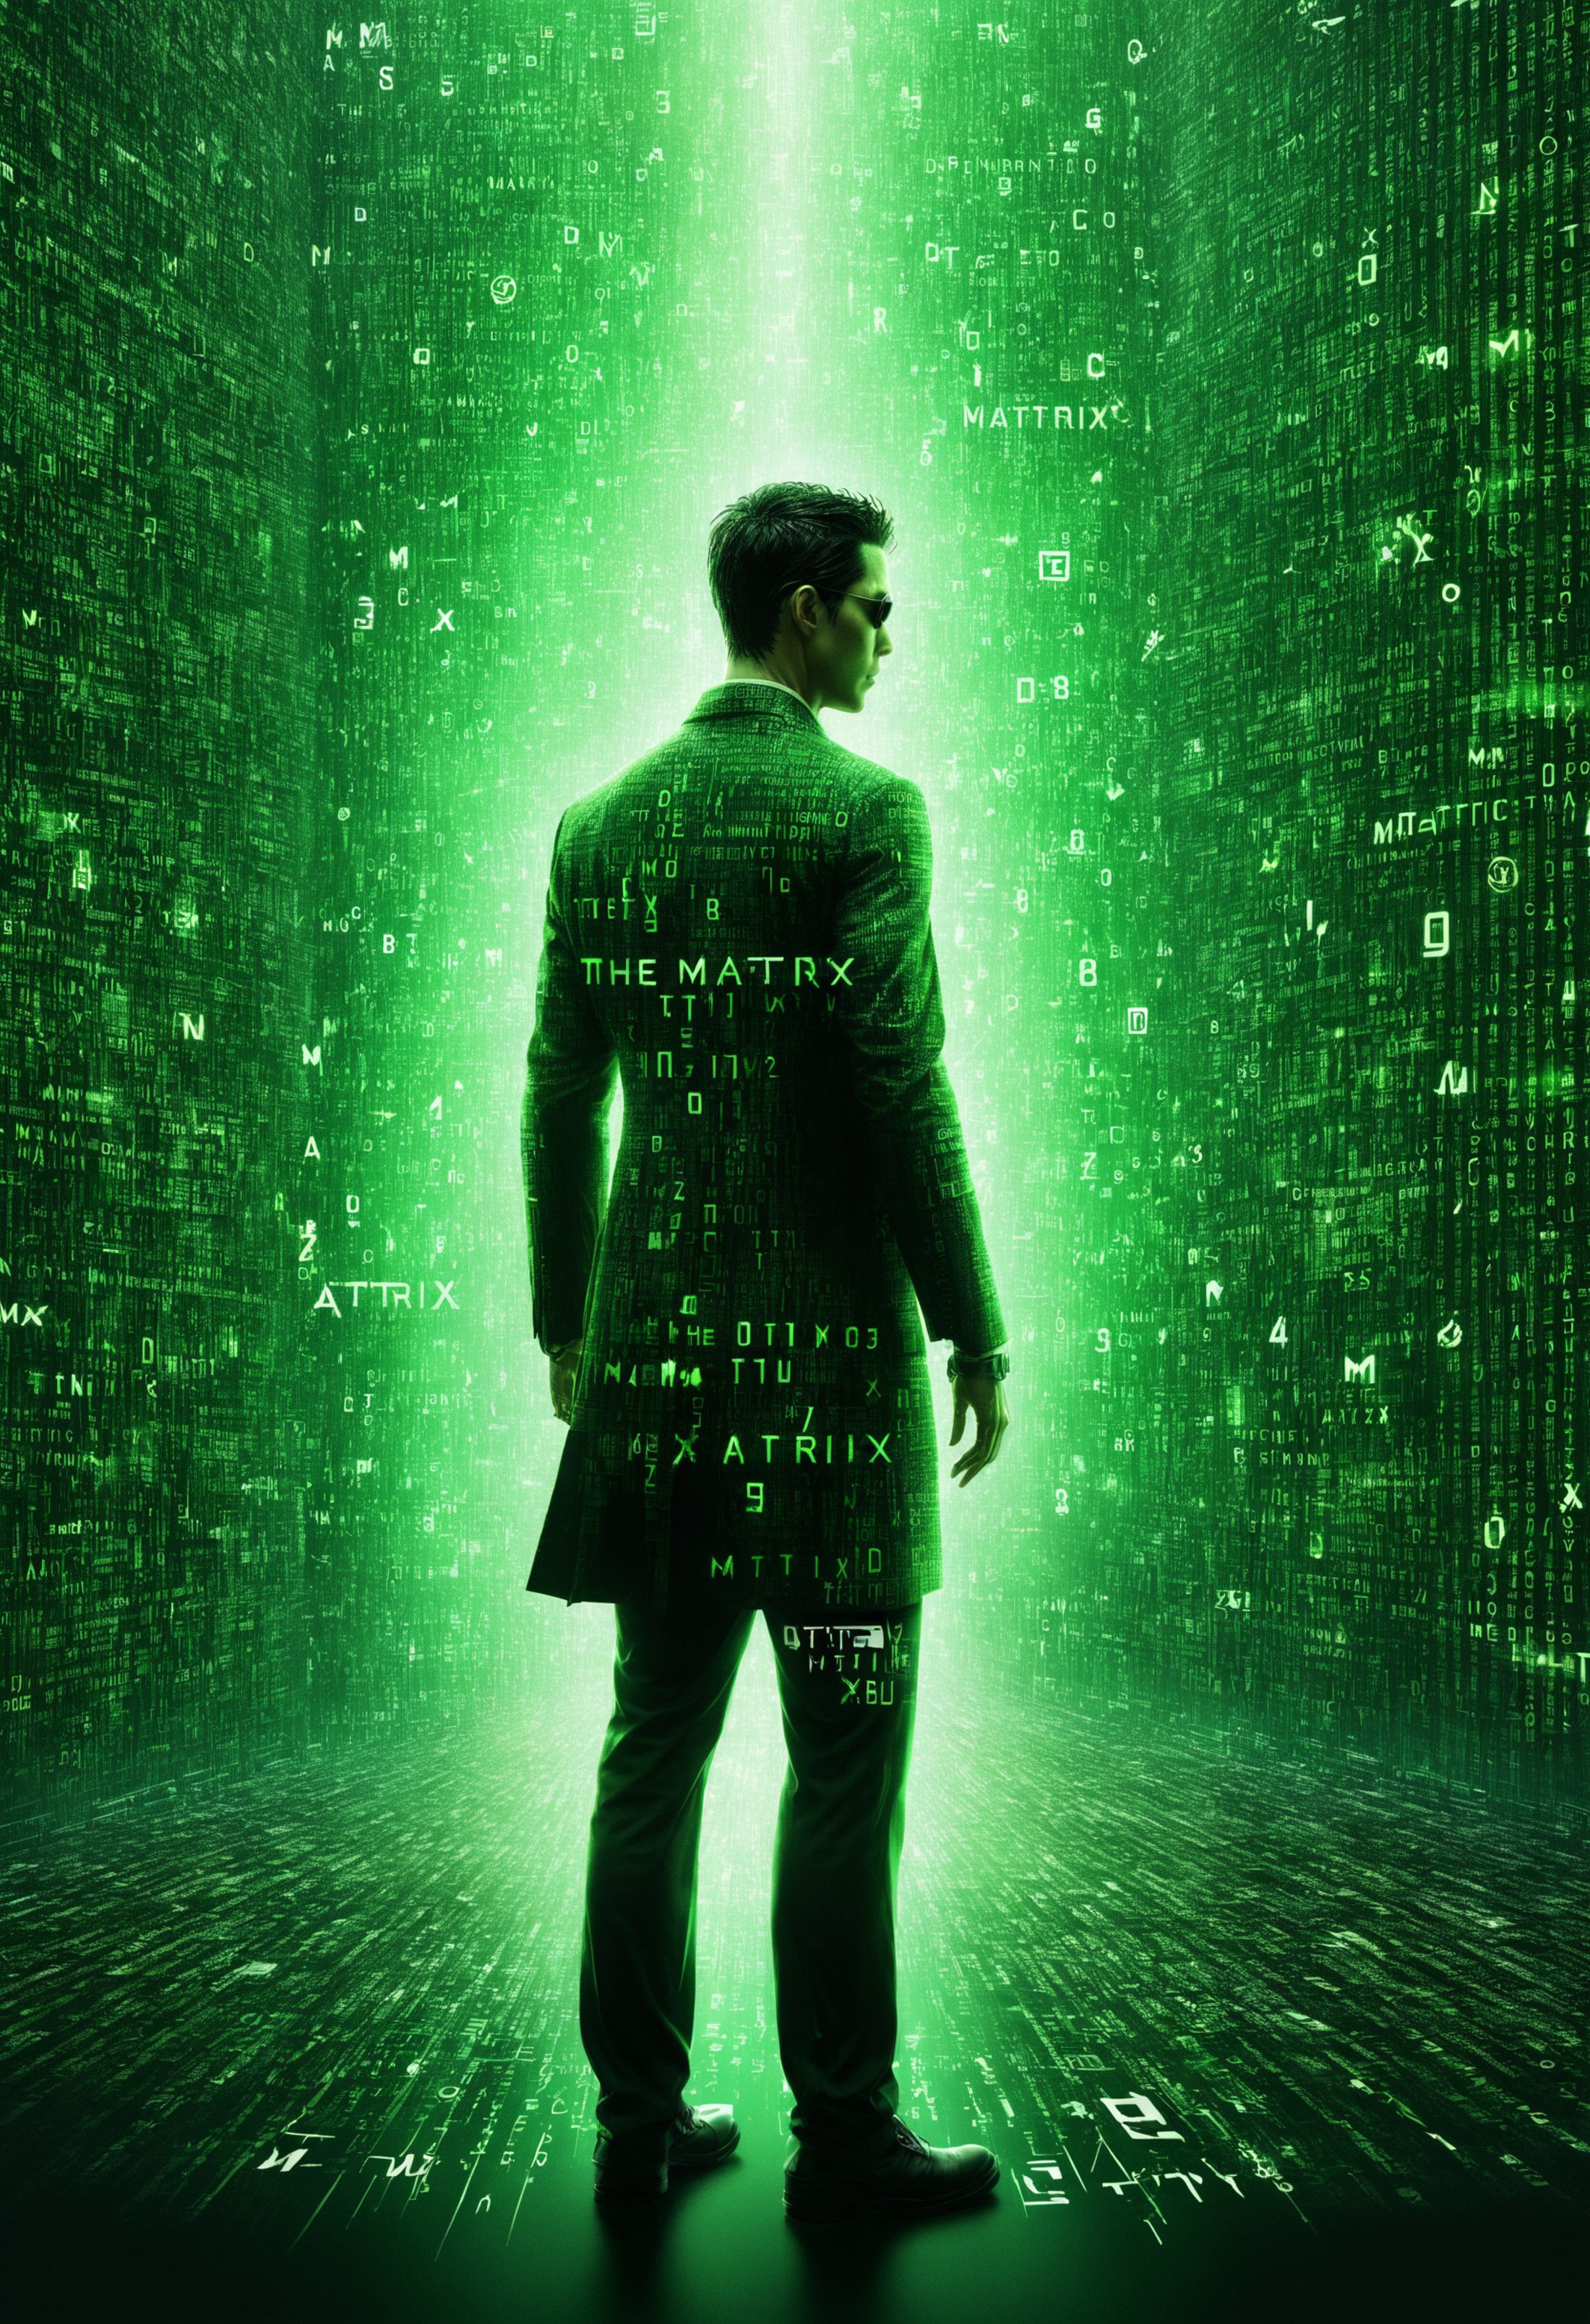 the silhouette of a person, double exposure, green matrix glyphs flying past, digital art, amazing quality, very detailed,...